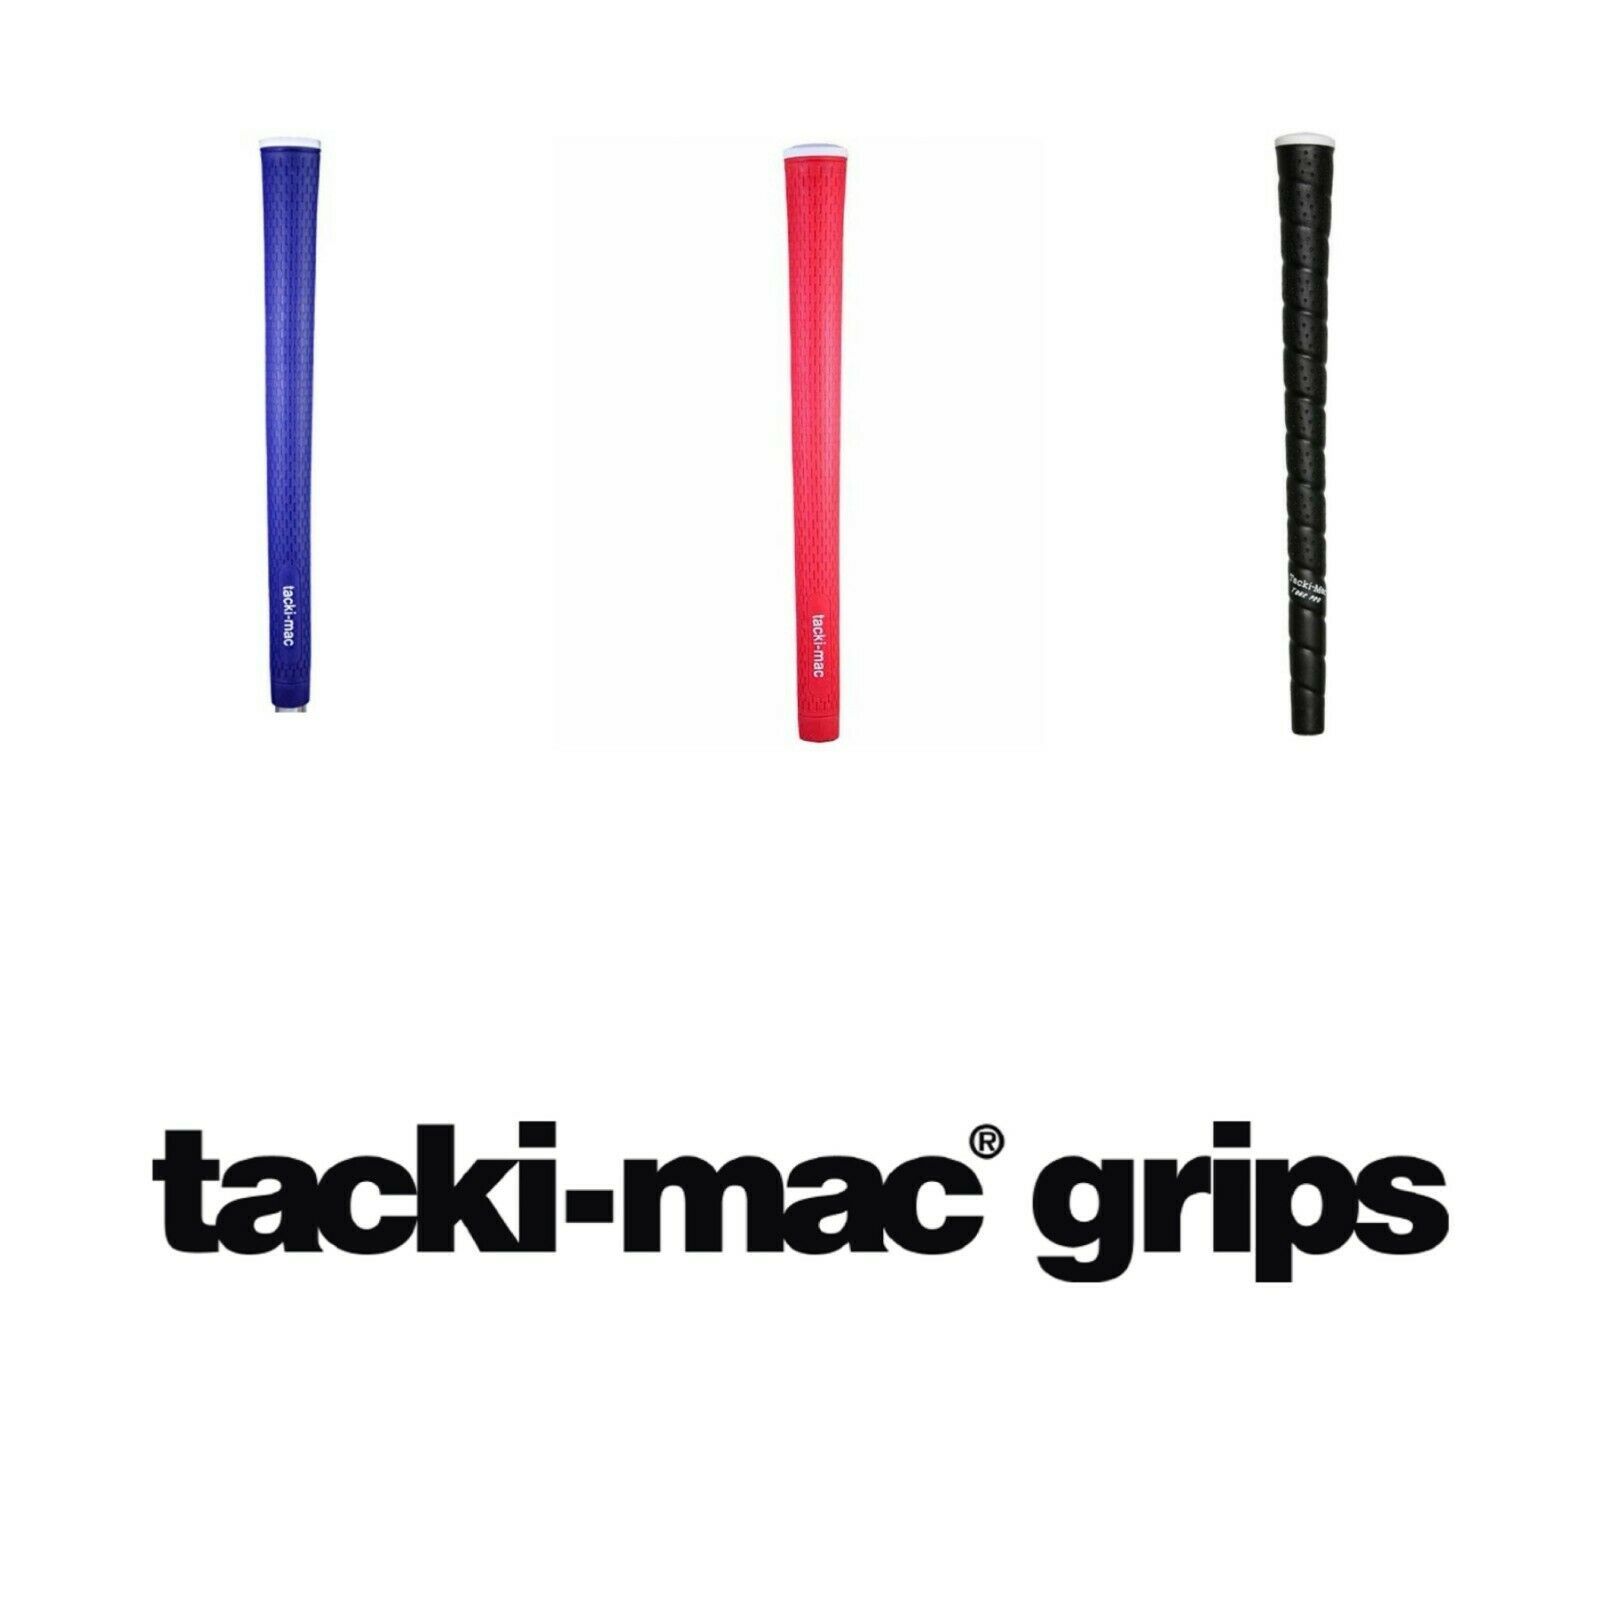 Primary image for Tacki Mac Itomic Men's Golf Grips. Red, Blue or Tour Pro Black Wrap.